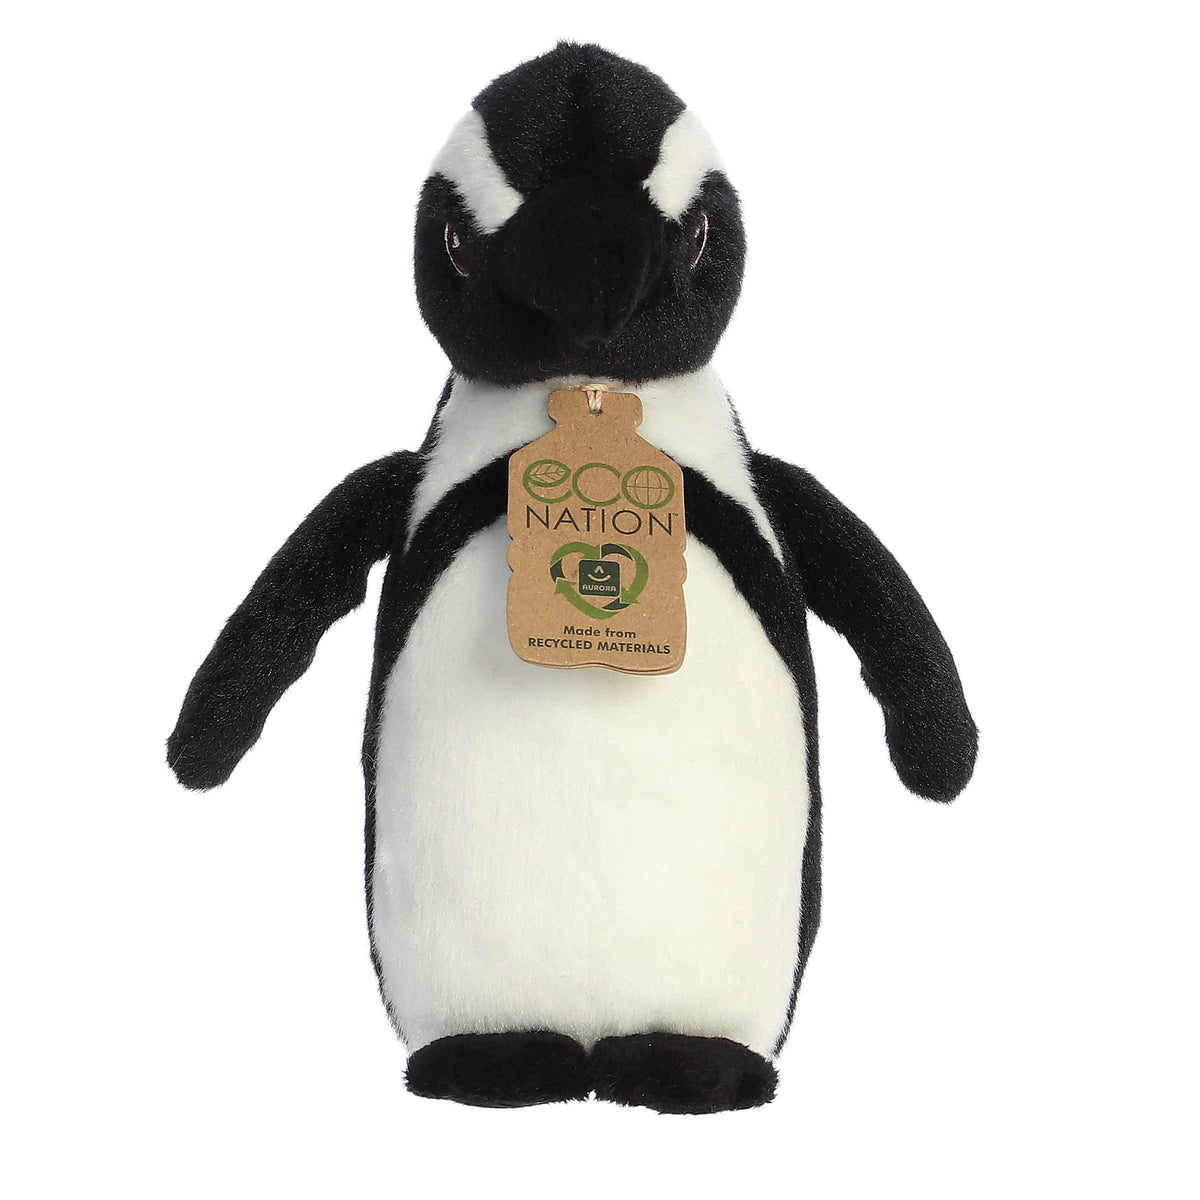 8'' Black Footed Penguin plush, soft and cuddly, made from recycled materials.